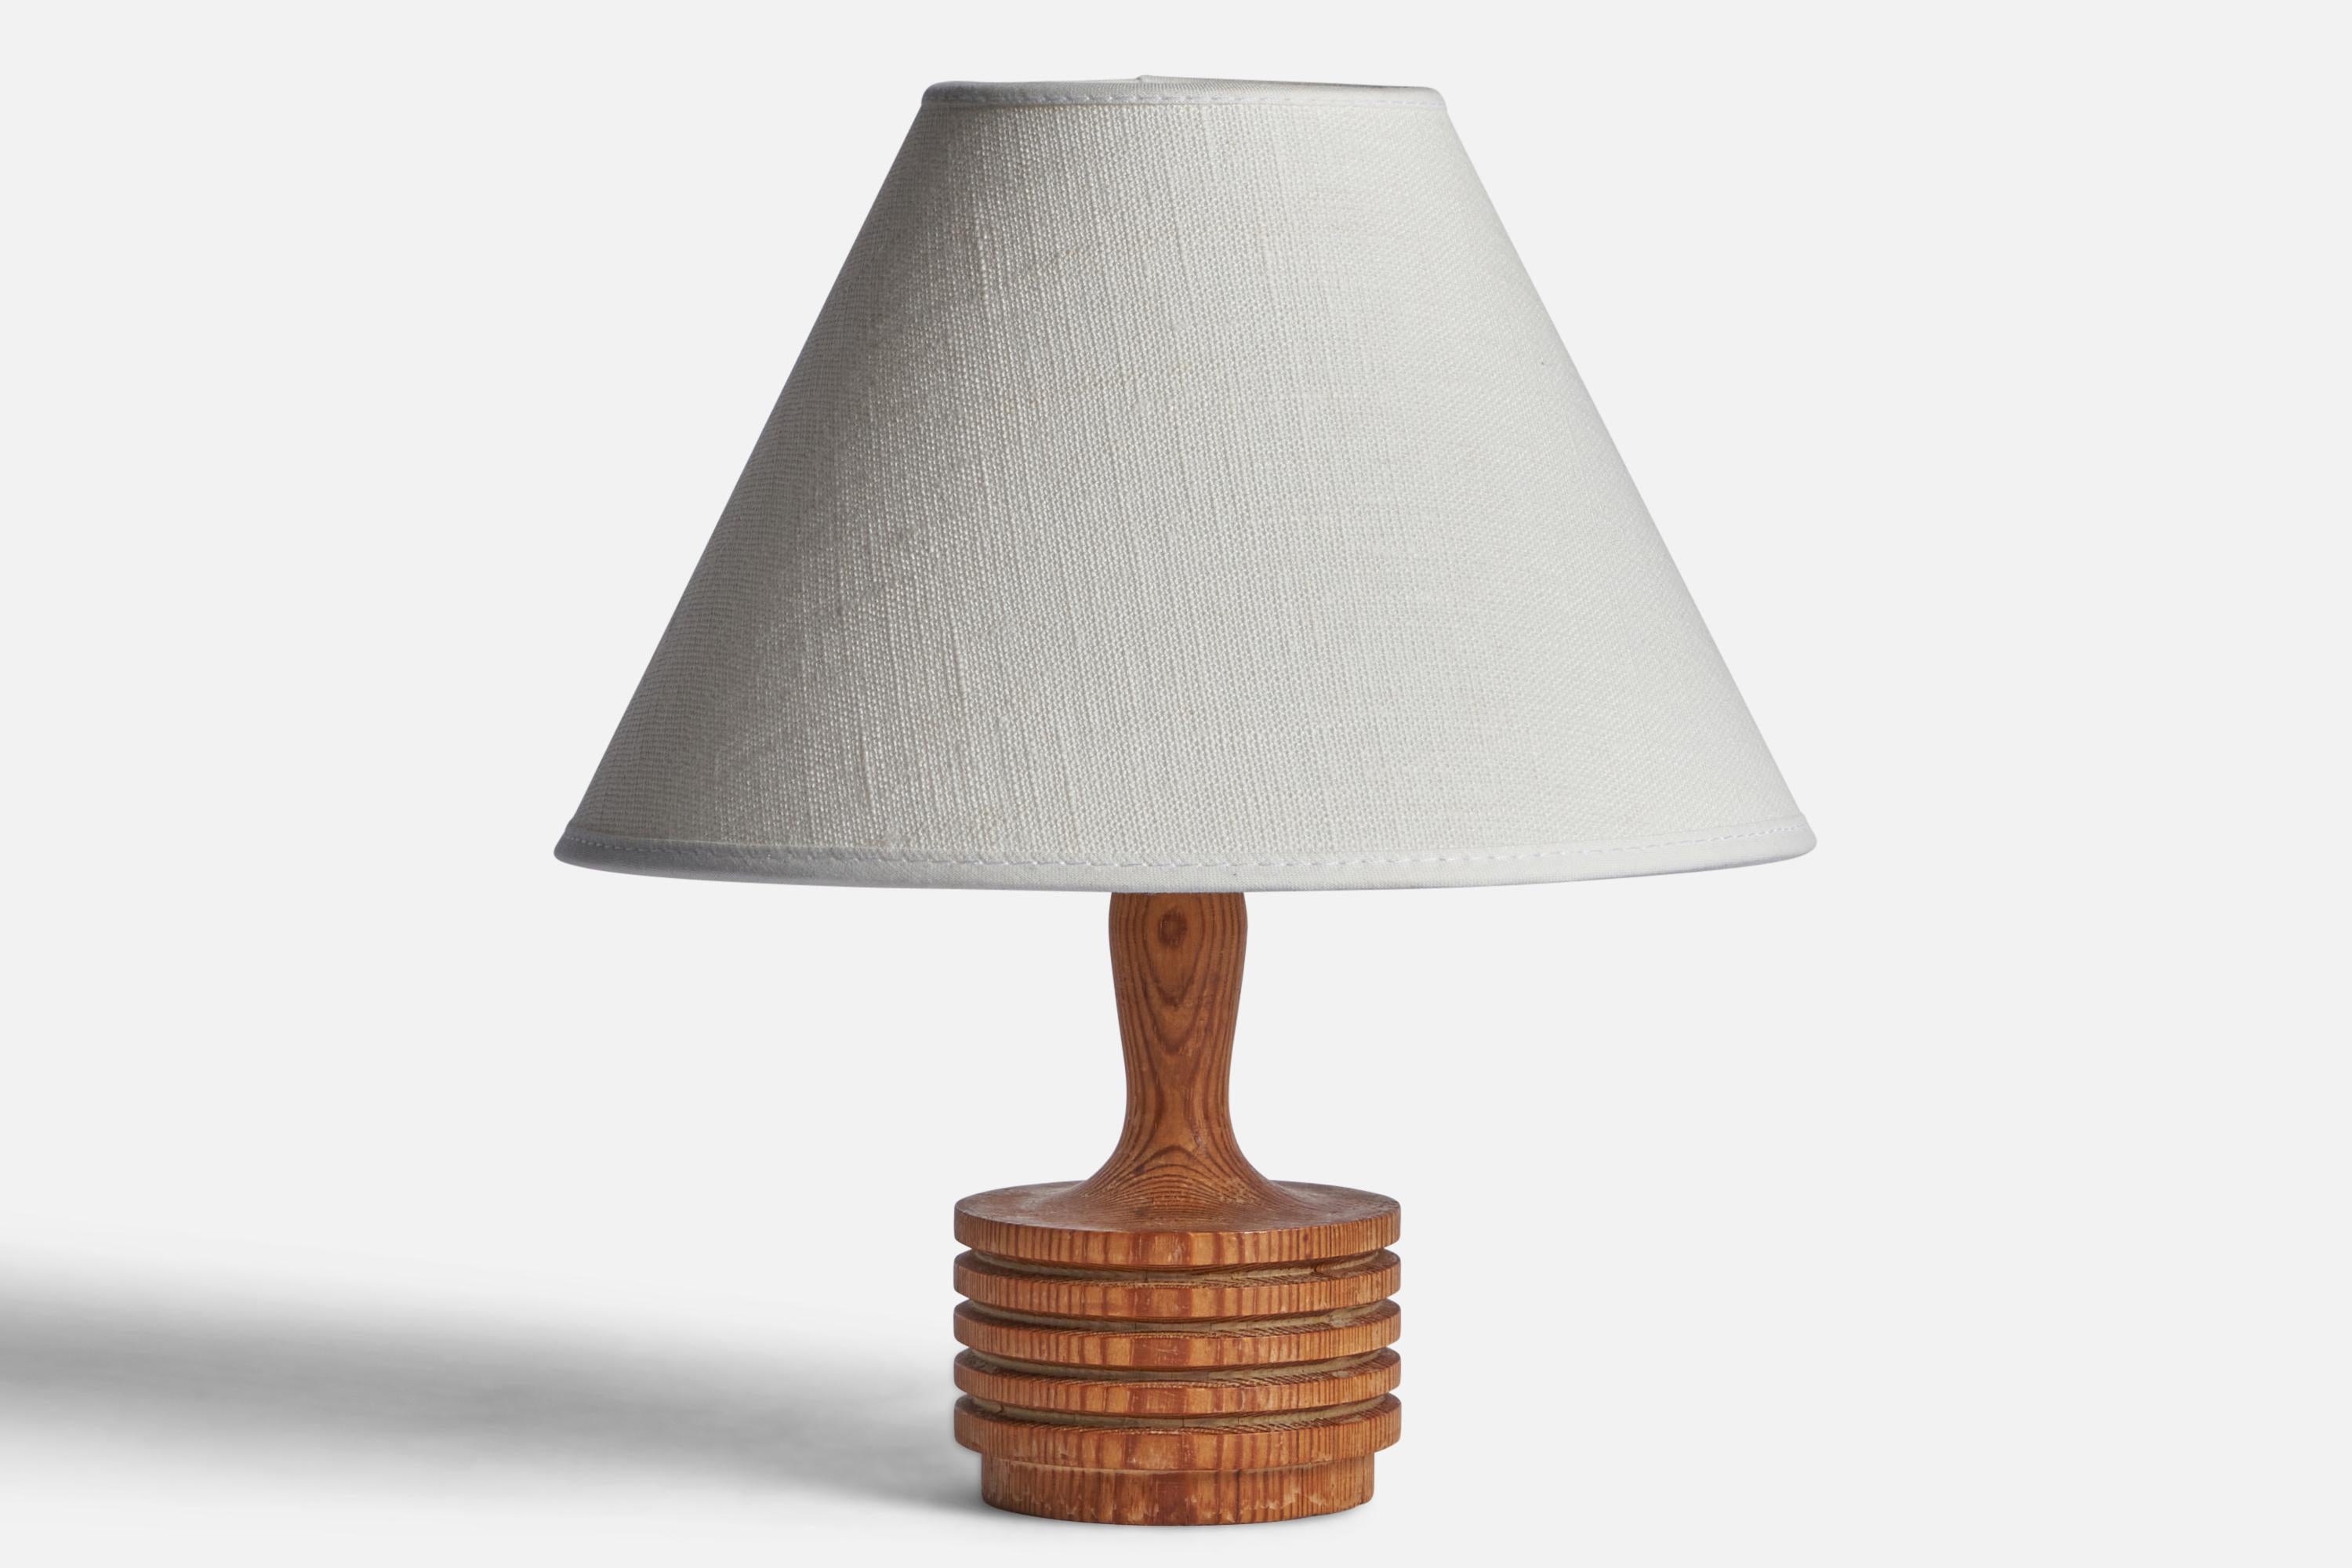 A turned pine table lamp designed and produced in Sweden, c. 1970s.

Dimensions of Lamp (inches): 6” H x 2.9” Diameter
Dimensions of Shade (inches): 3” Top Diameter x 8” Bottom Diameter x 5” H 
Dimensions of Lamp with Shade (inches): 9.25” H x 8”